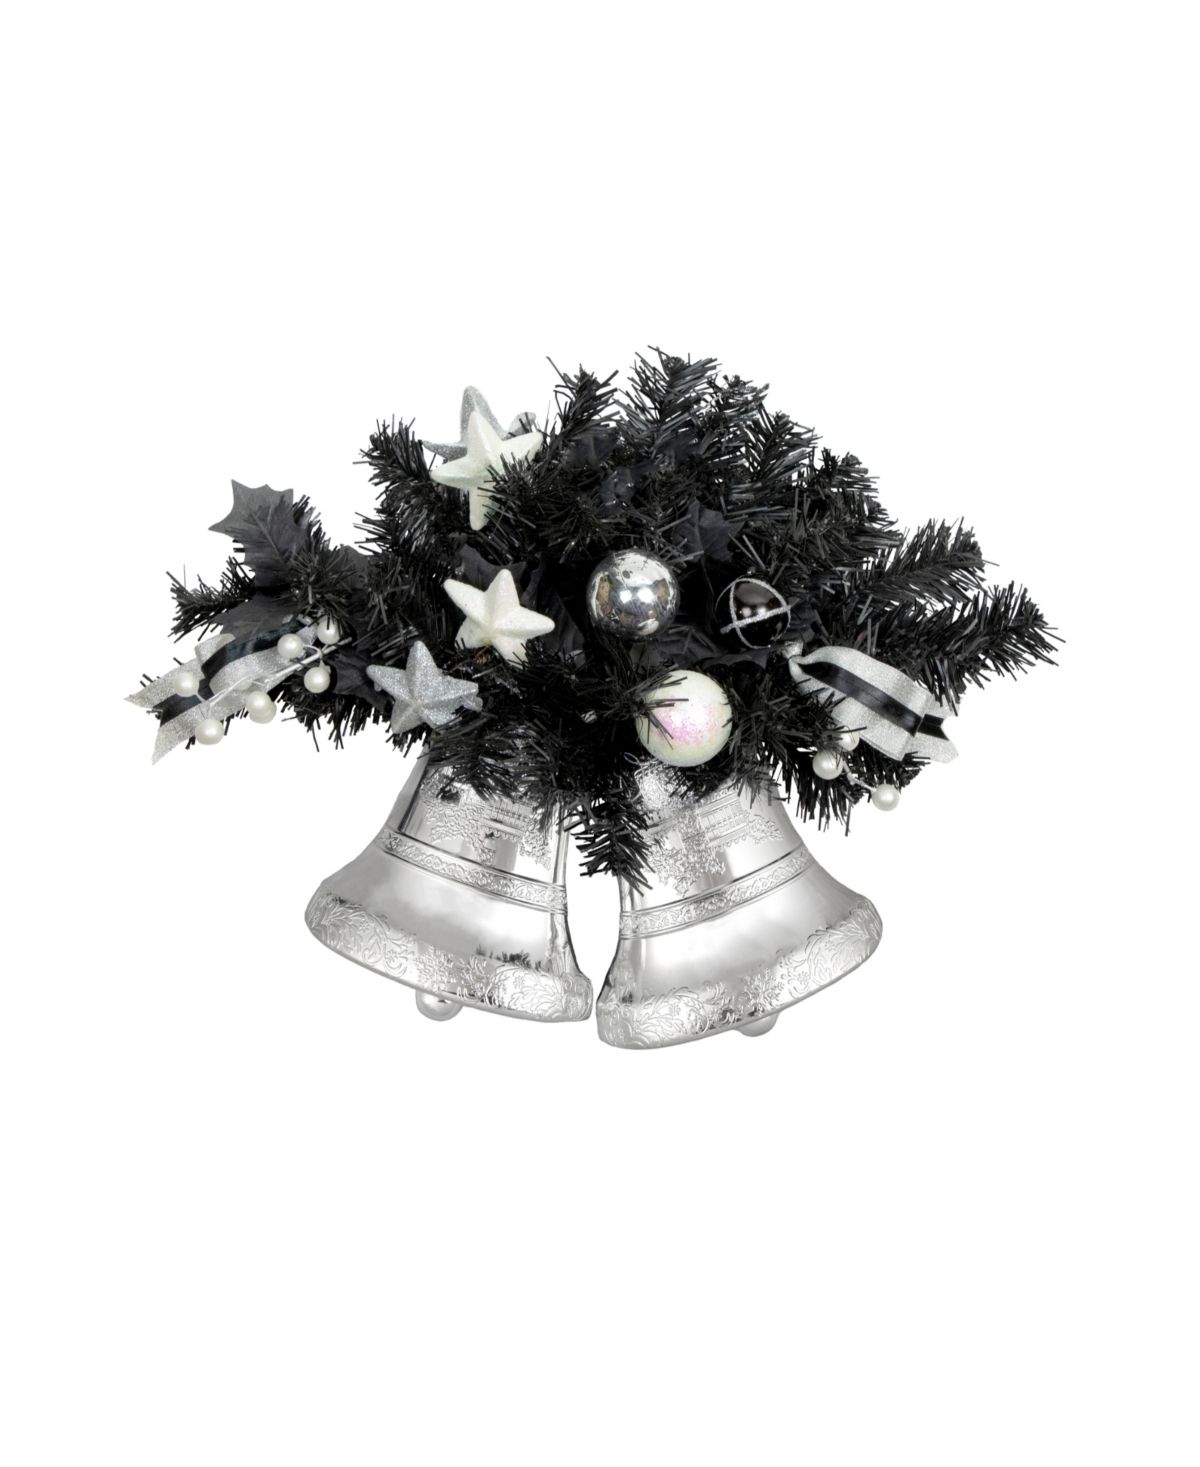 18" Decorated Pine Artificial Christmas Swag with Bells - Black